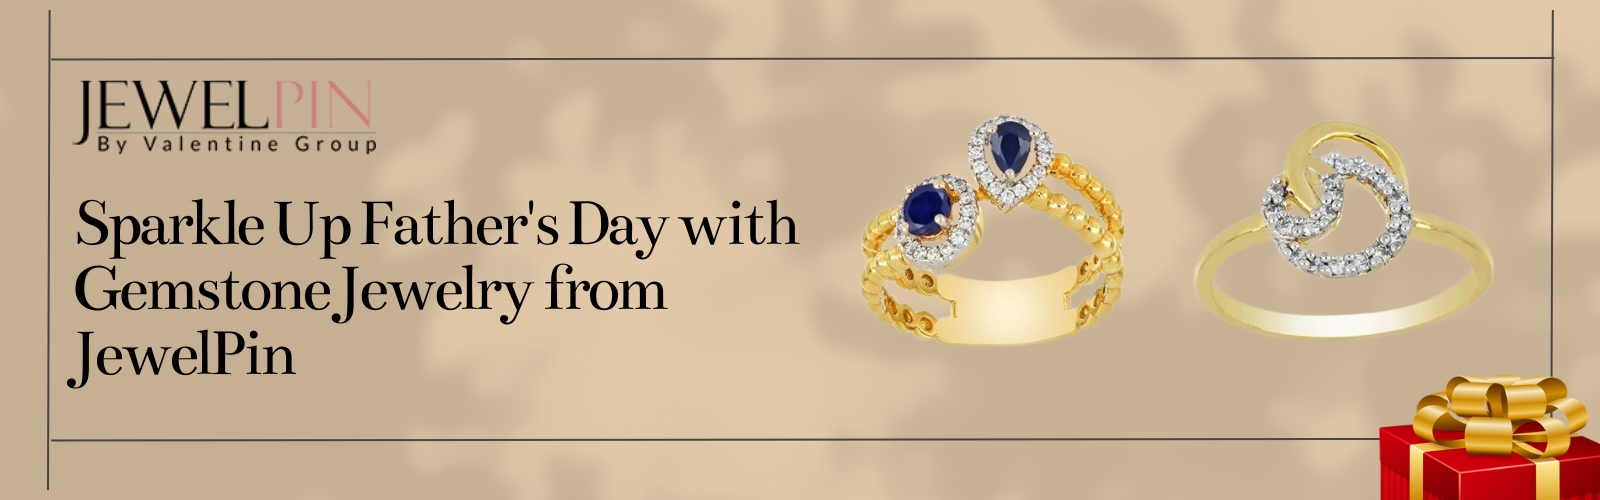 sparkle up fathers day with gemstone jewellery from jewelpin